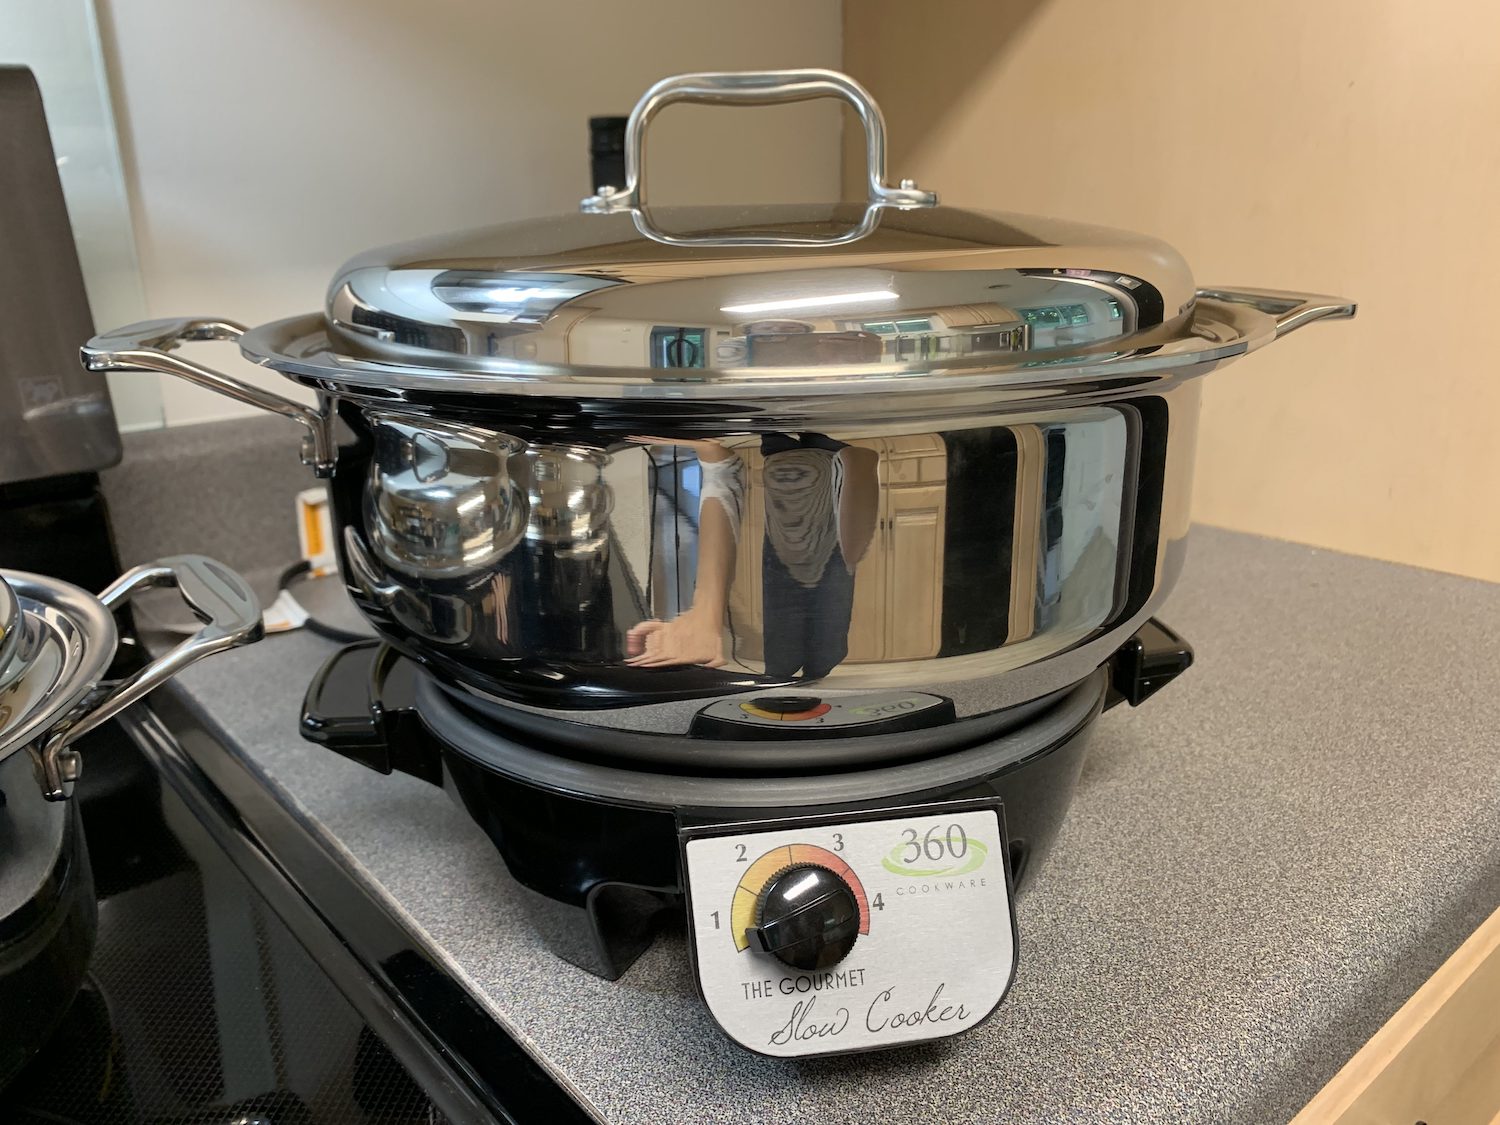 A Review Of The West Bend Slow Cooker